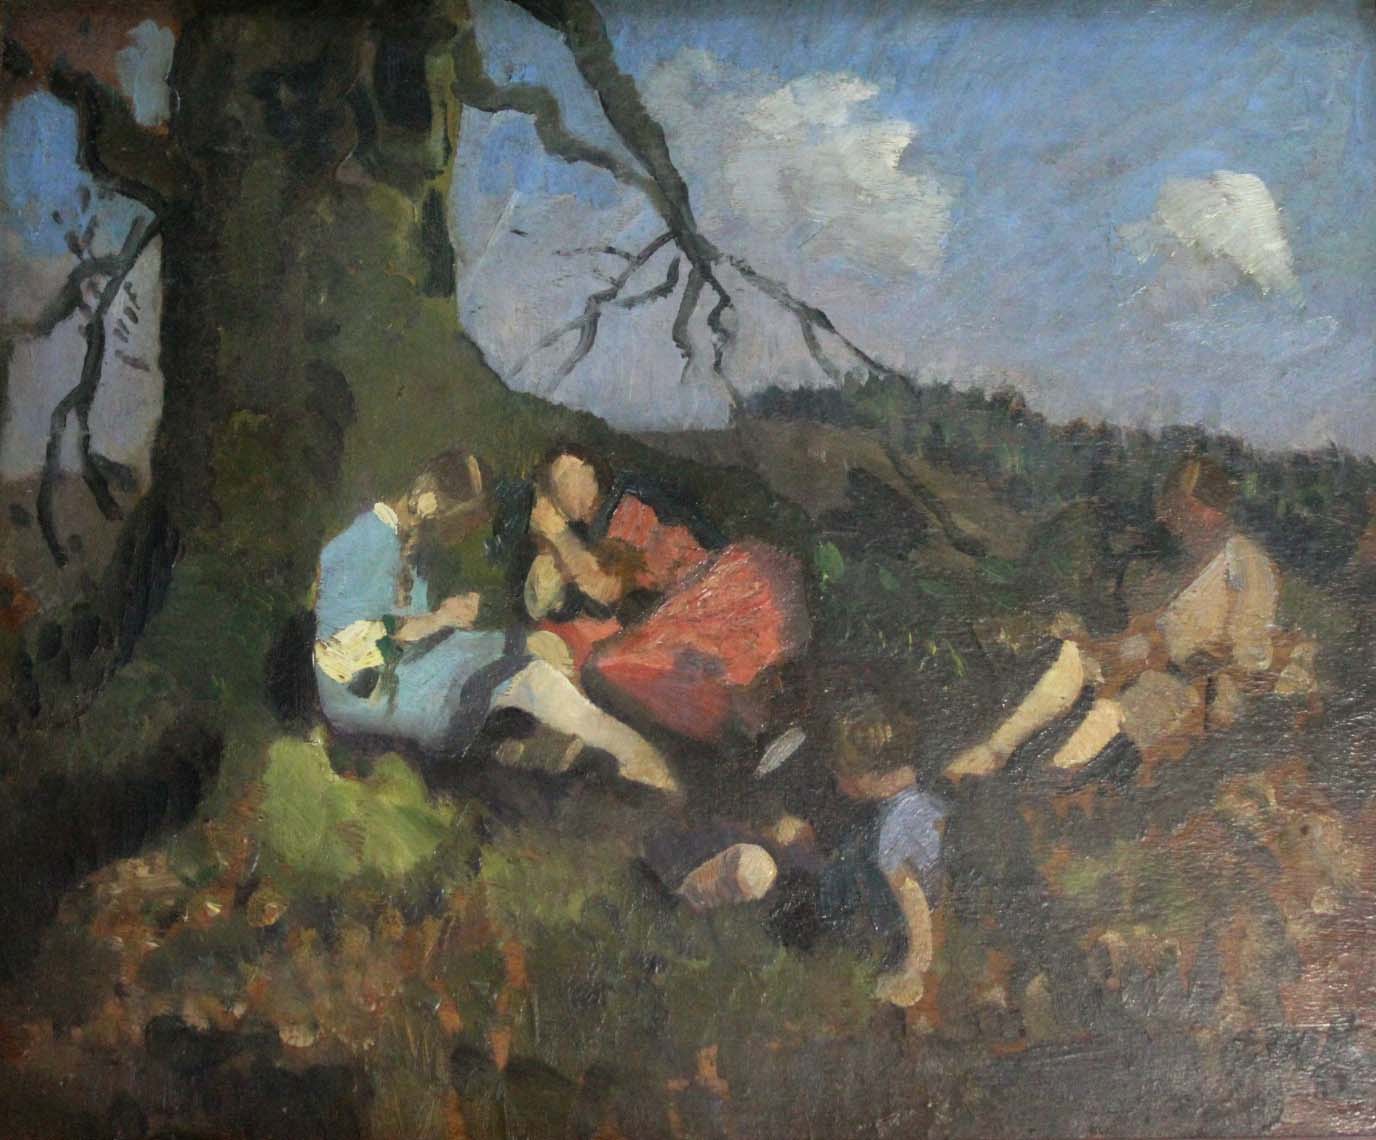 GEORGE WASHINGTON LAMBERT (Anglo-Australian, 1872-1930) PICNIC AT LIPHOOK Signed with initials, with